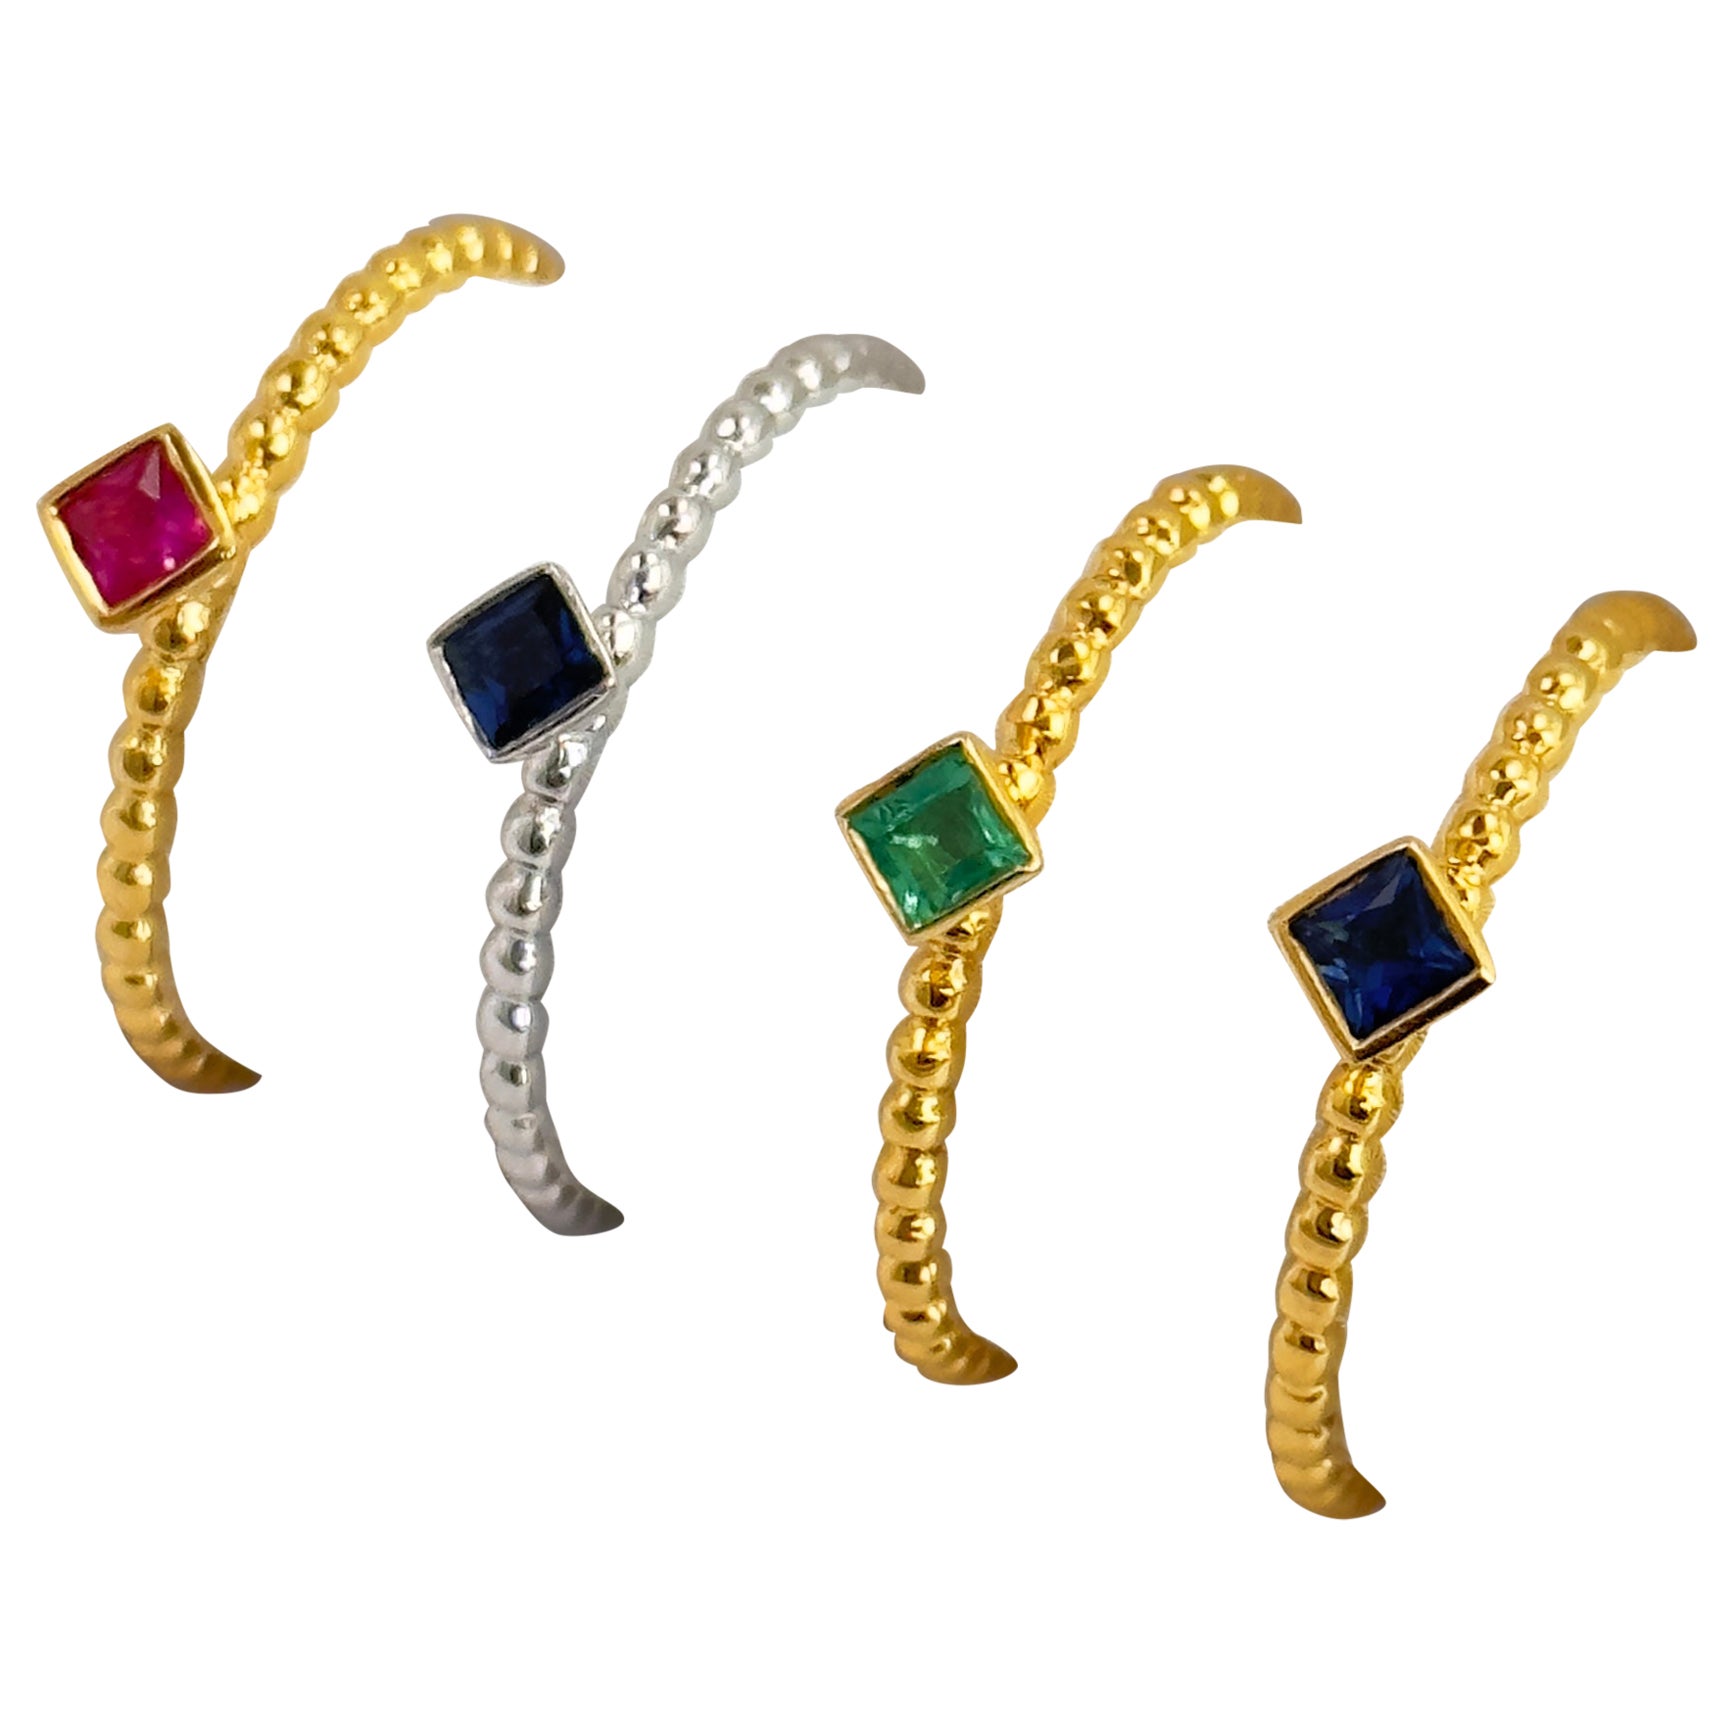 Another great addition! We are building our gemstone solitaire collection bit by bit for you to enjoy this holiday season and for the new year! Made with genuine gemstones, these rings are made in 18k solid gold. Bezel set center stones, these rings